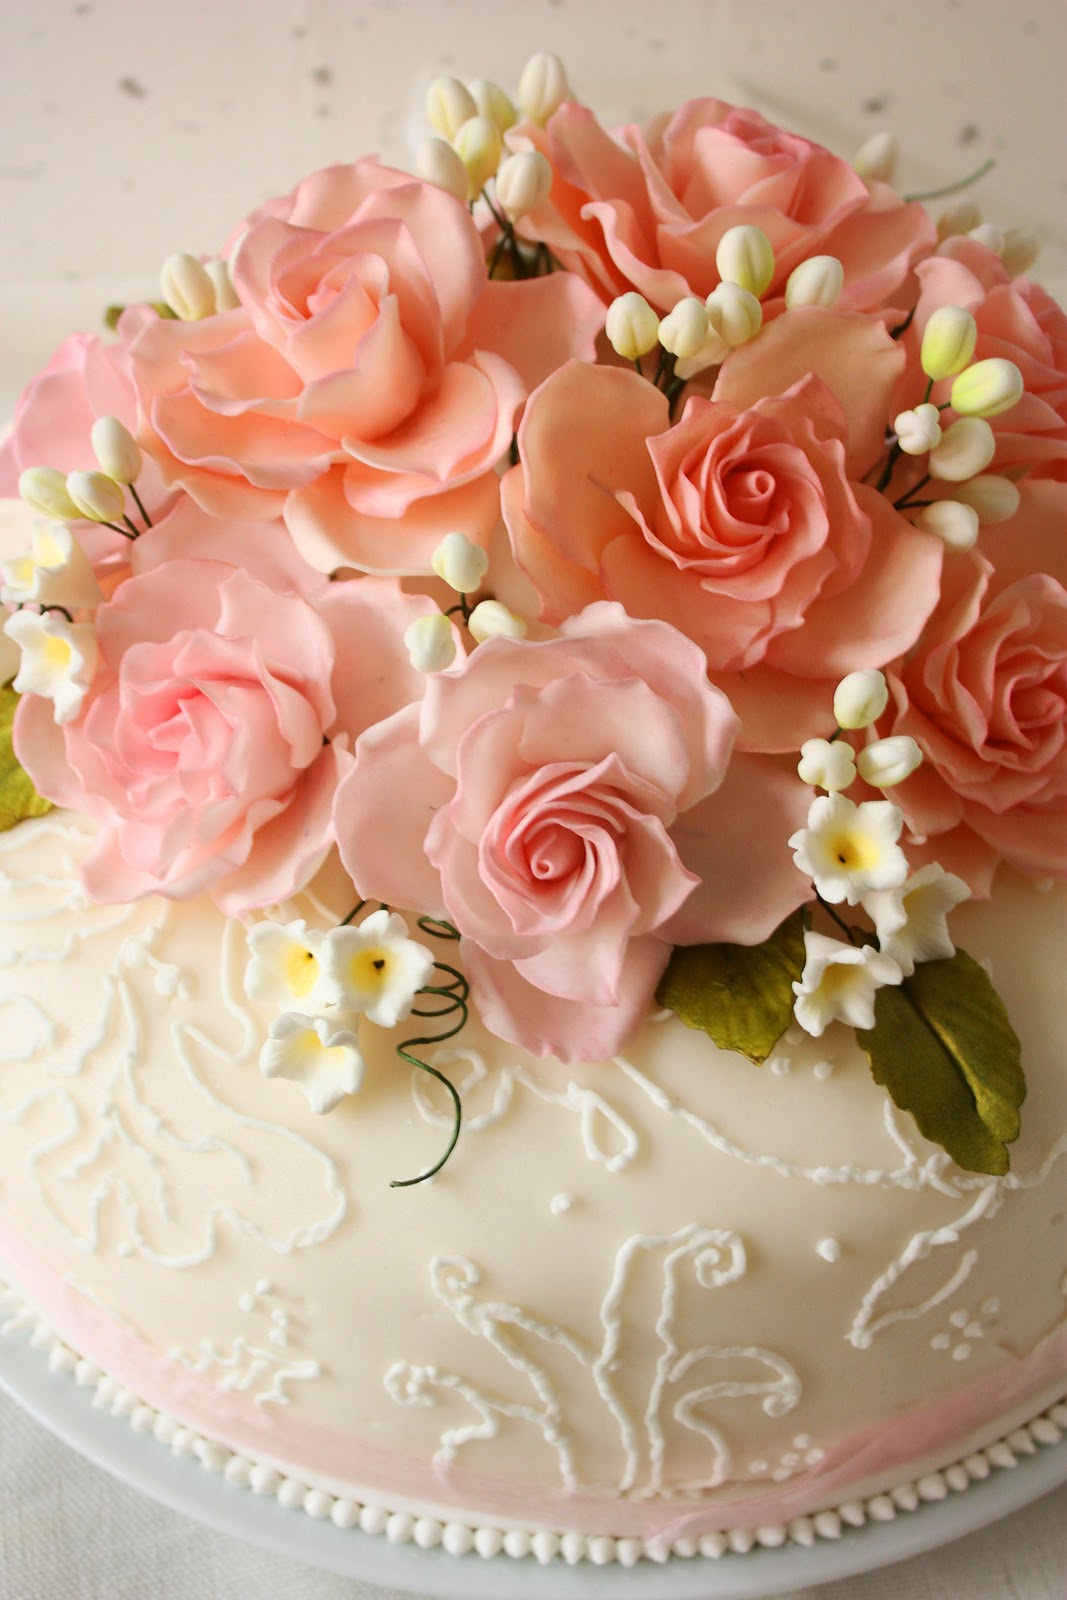 pink rose wedding cake colours make the world go round in my world